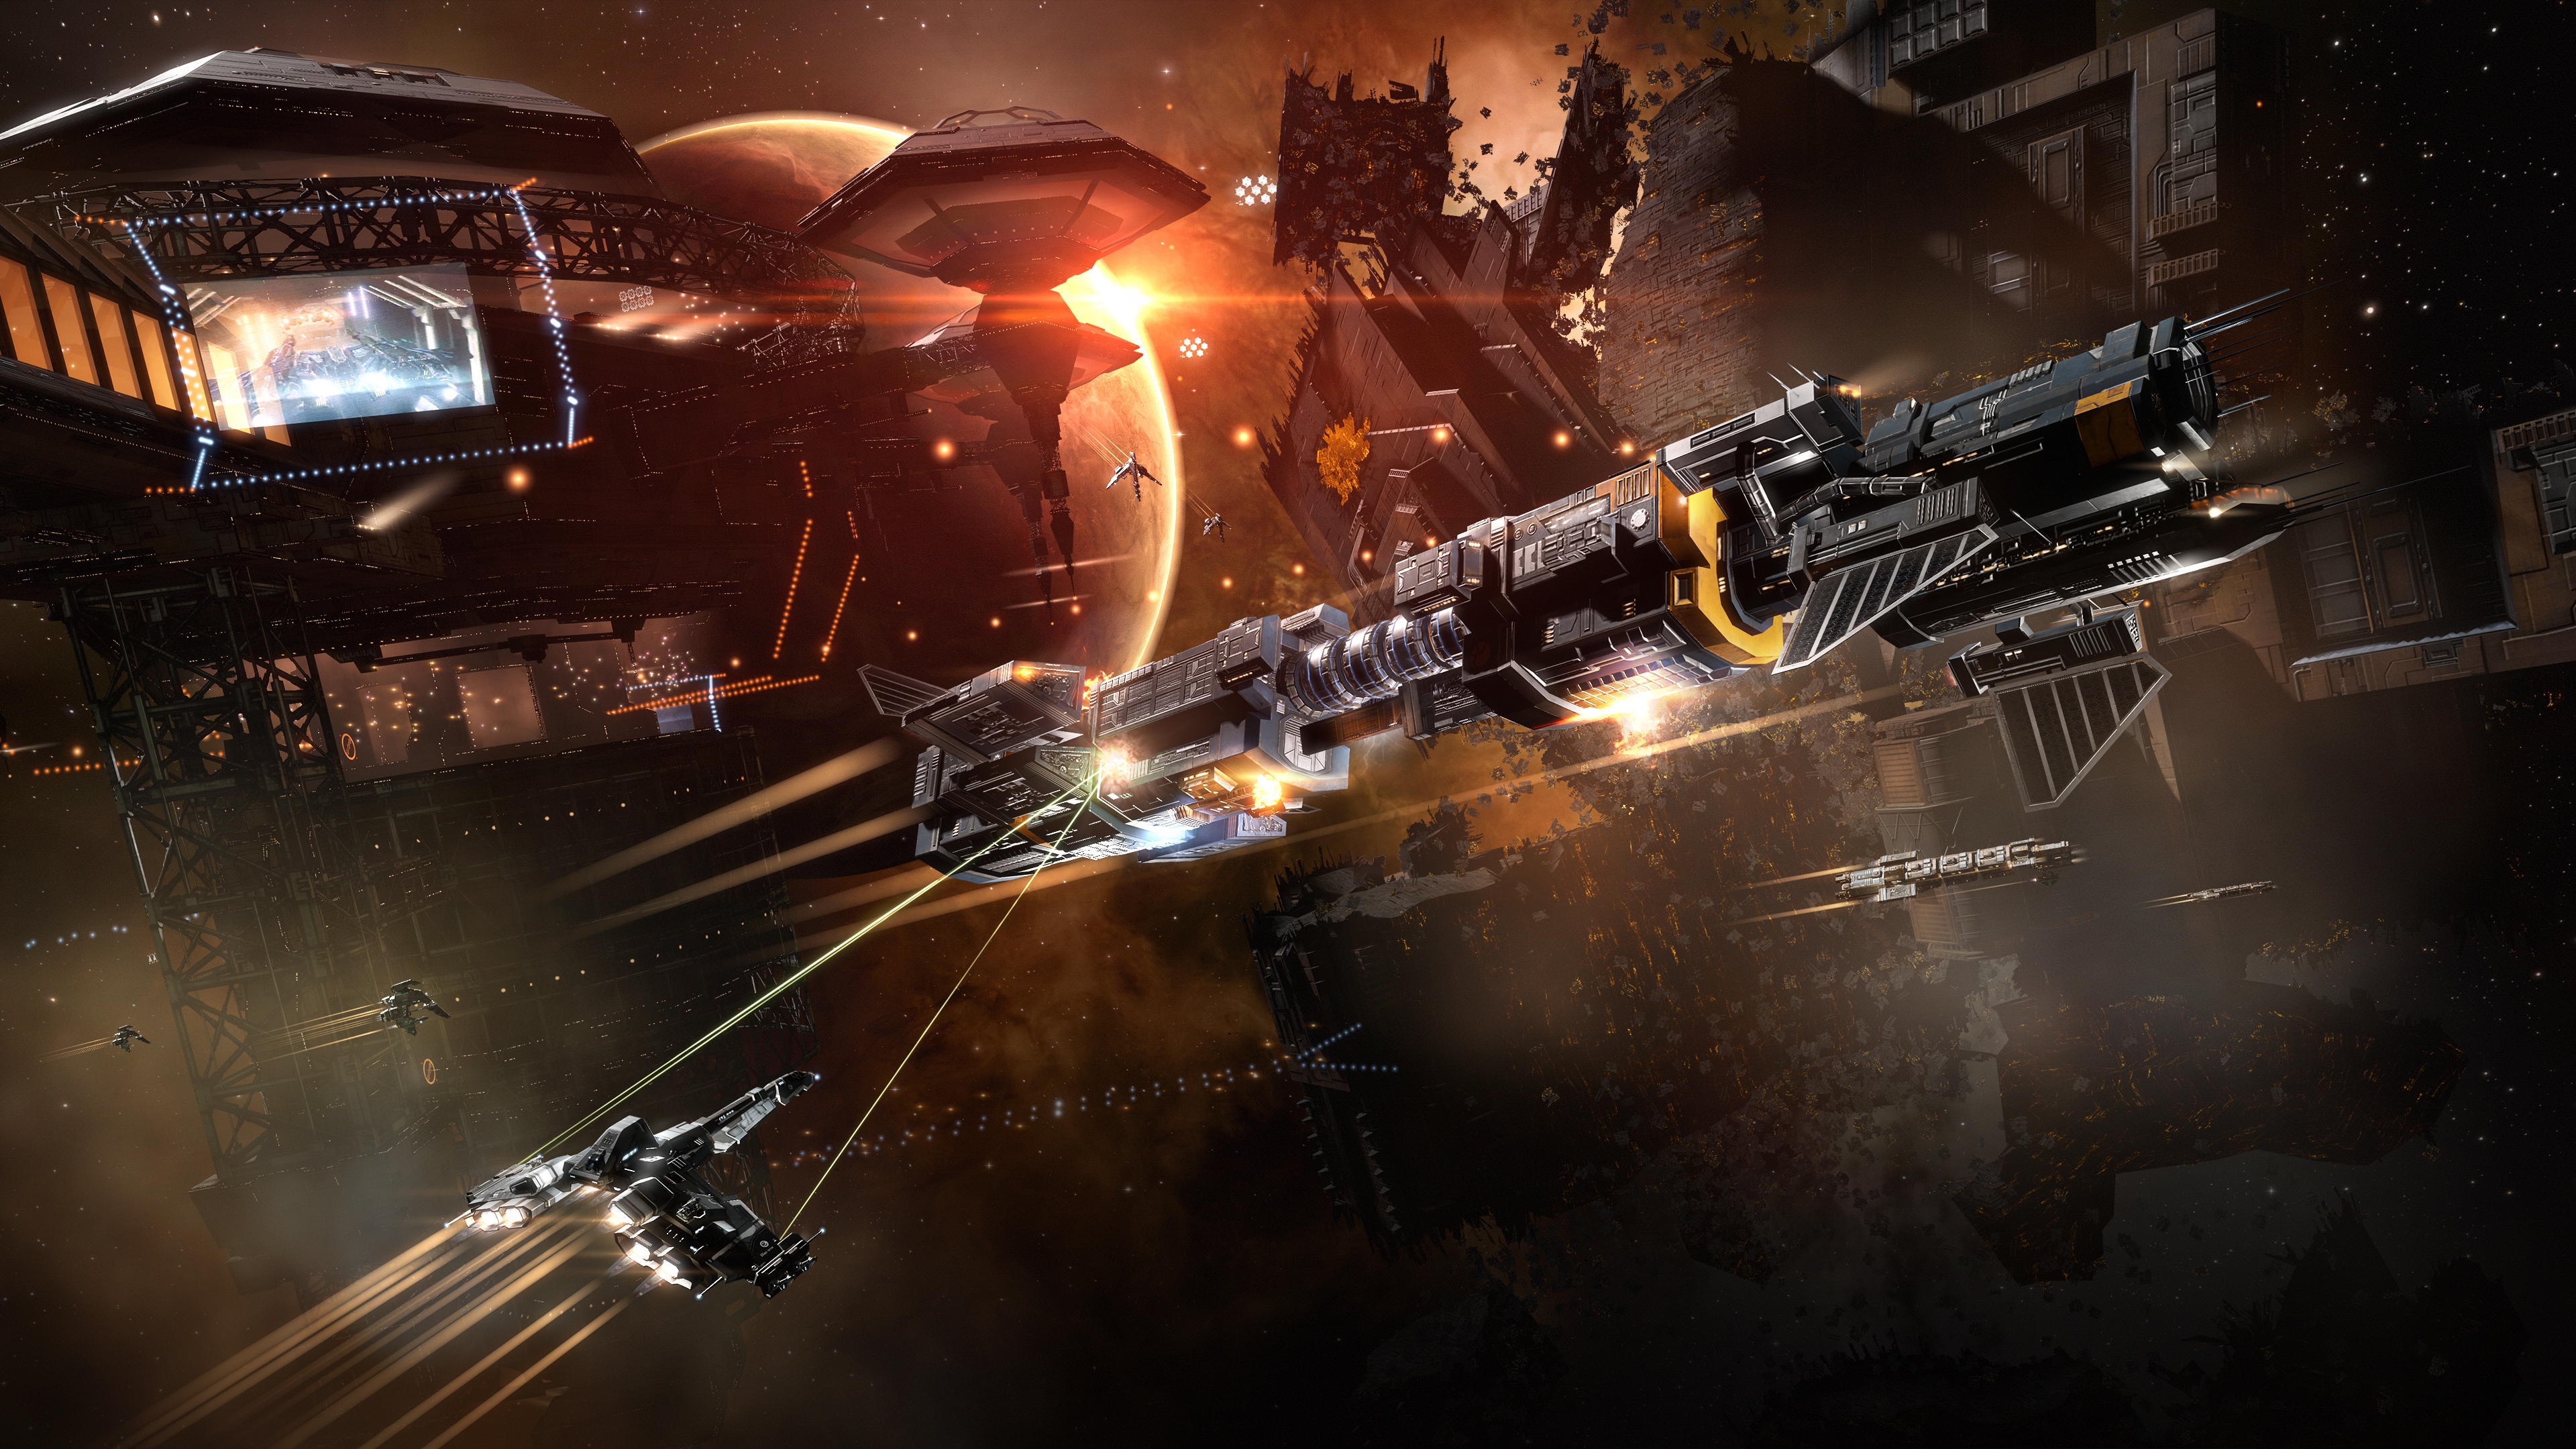 EVE Online Spaceship Galaxy Science Fiction Video Games Planet Video Game Art War Space 3840x2160